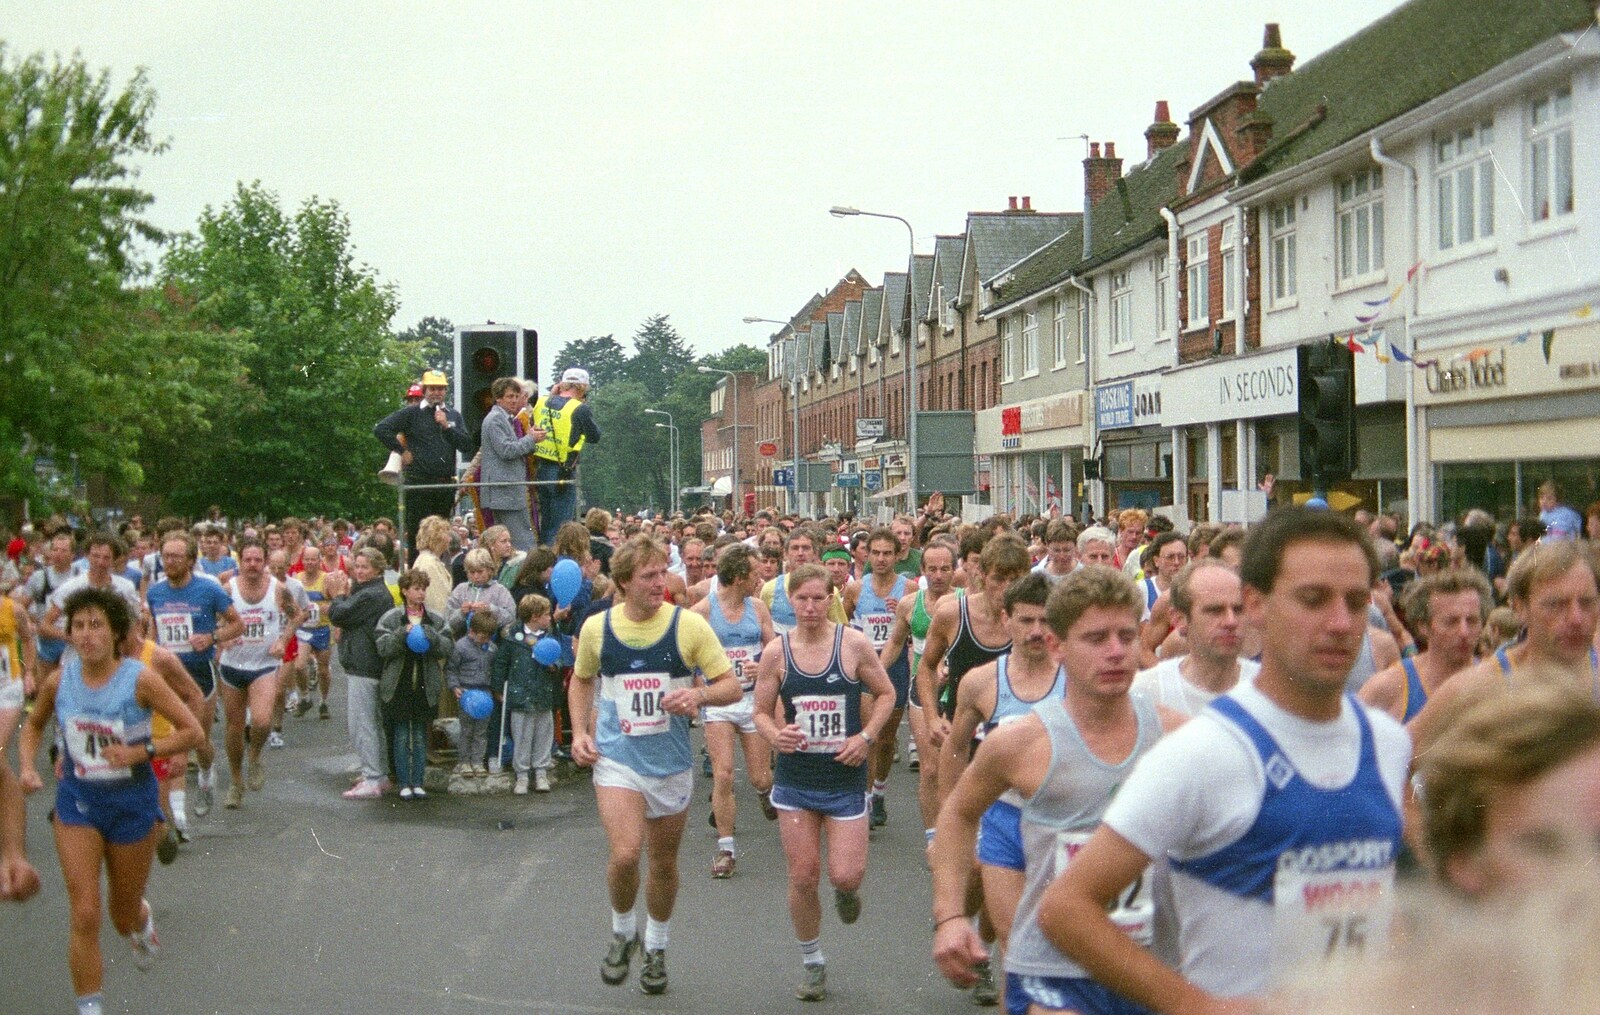 The runners stream through the starting line from The New Forest Marathon, New Milton, Hampshire - 14th September 1986